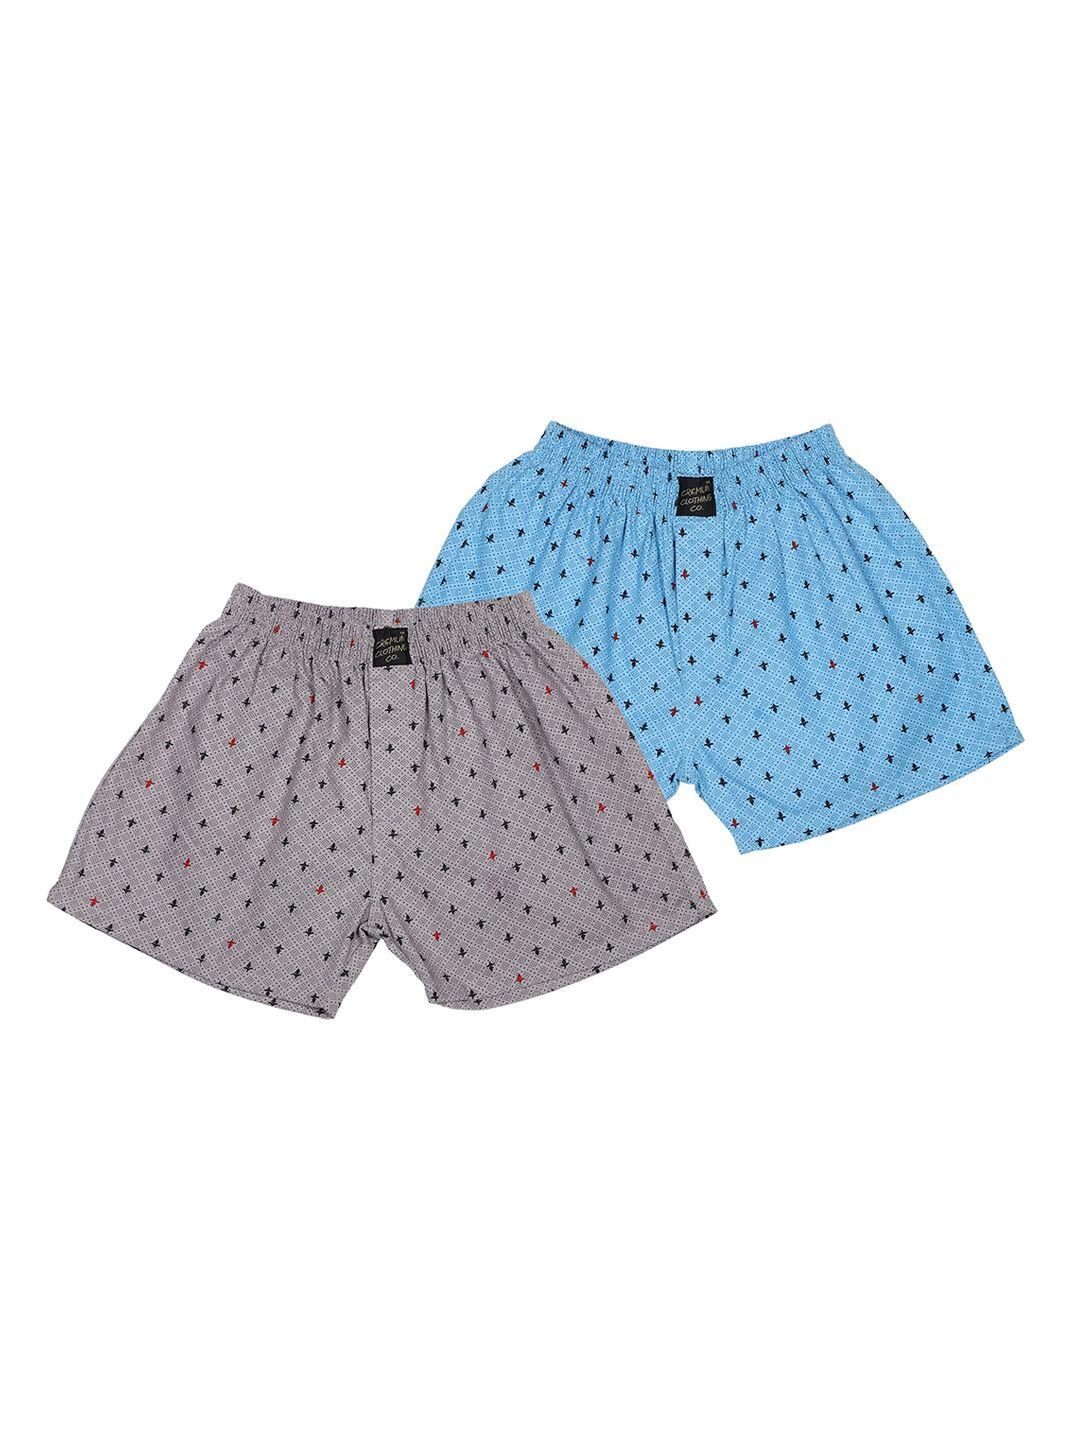 cremlin clothing boys pack of 2 printed pure cotton boxers